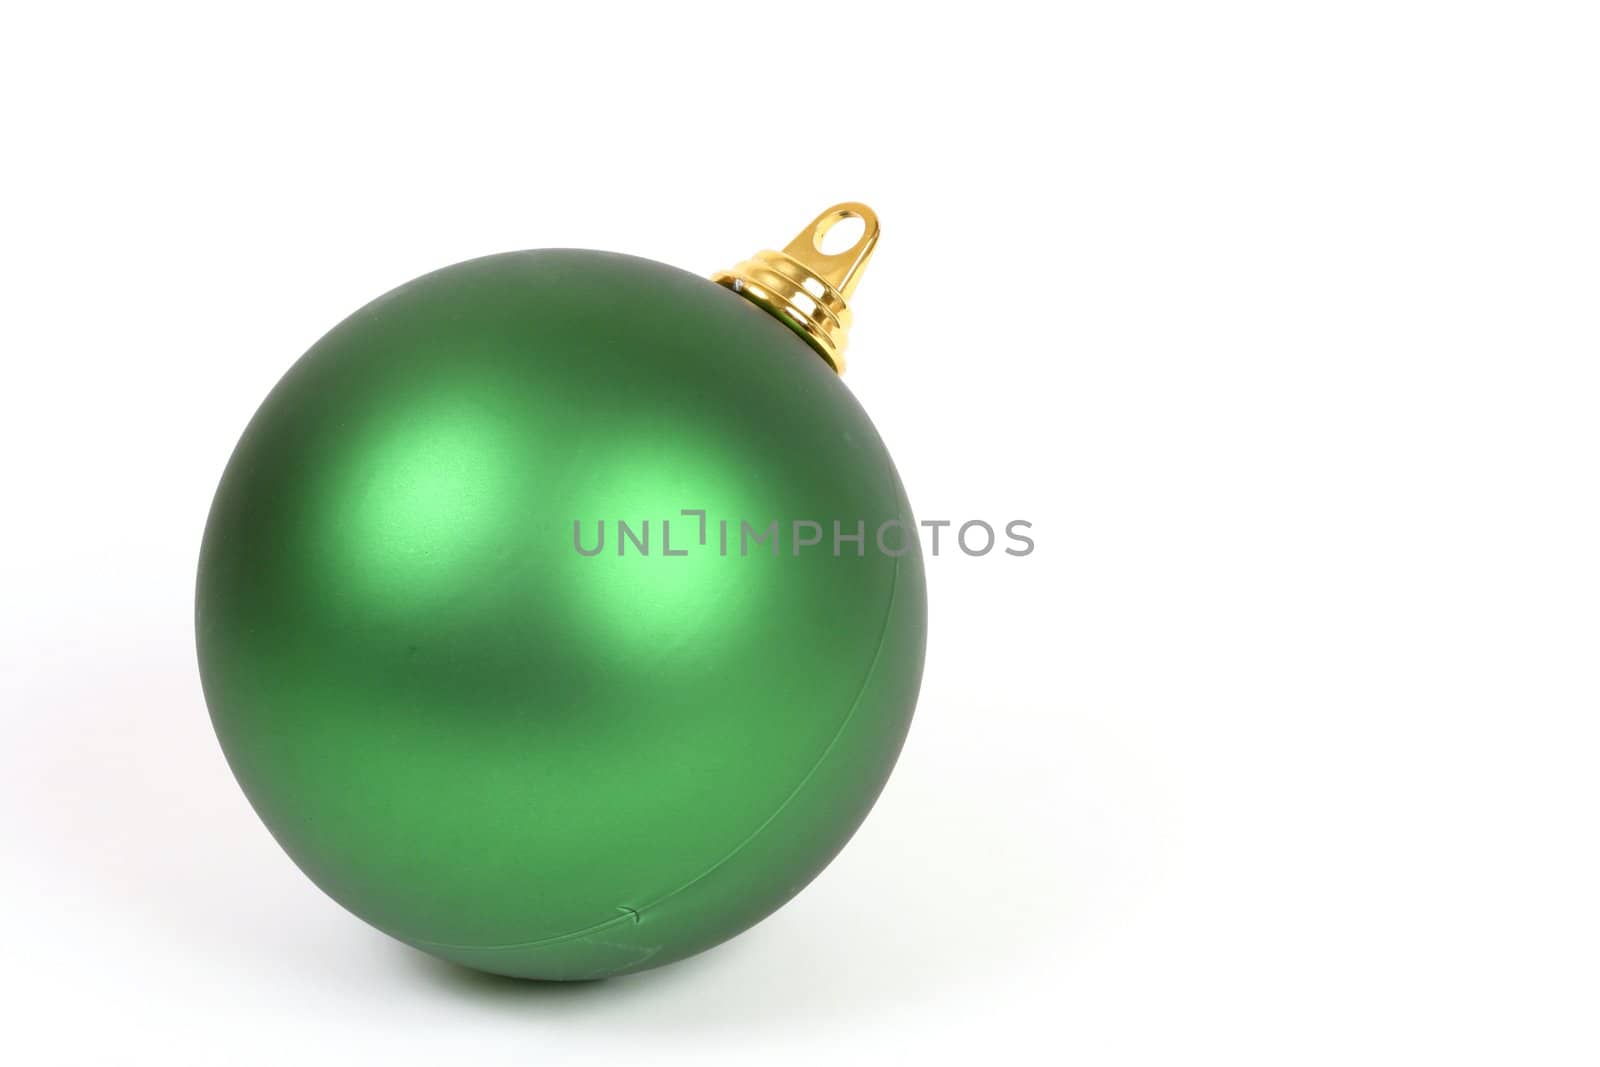 A plain christmas ball decoration on a white background